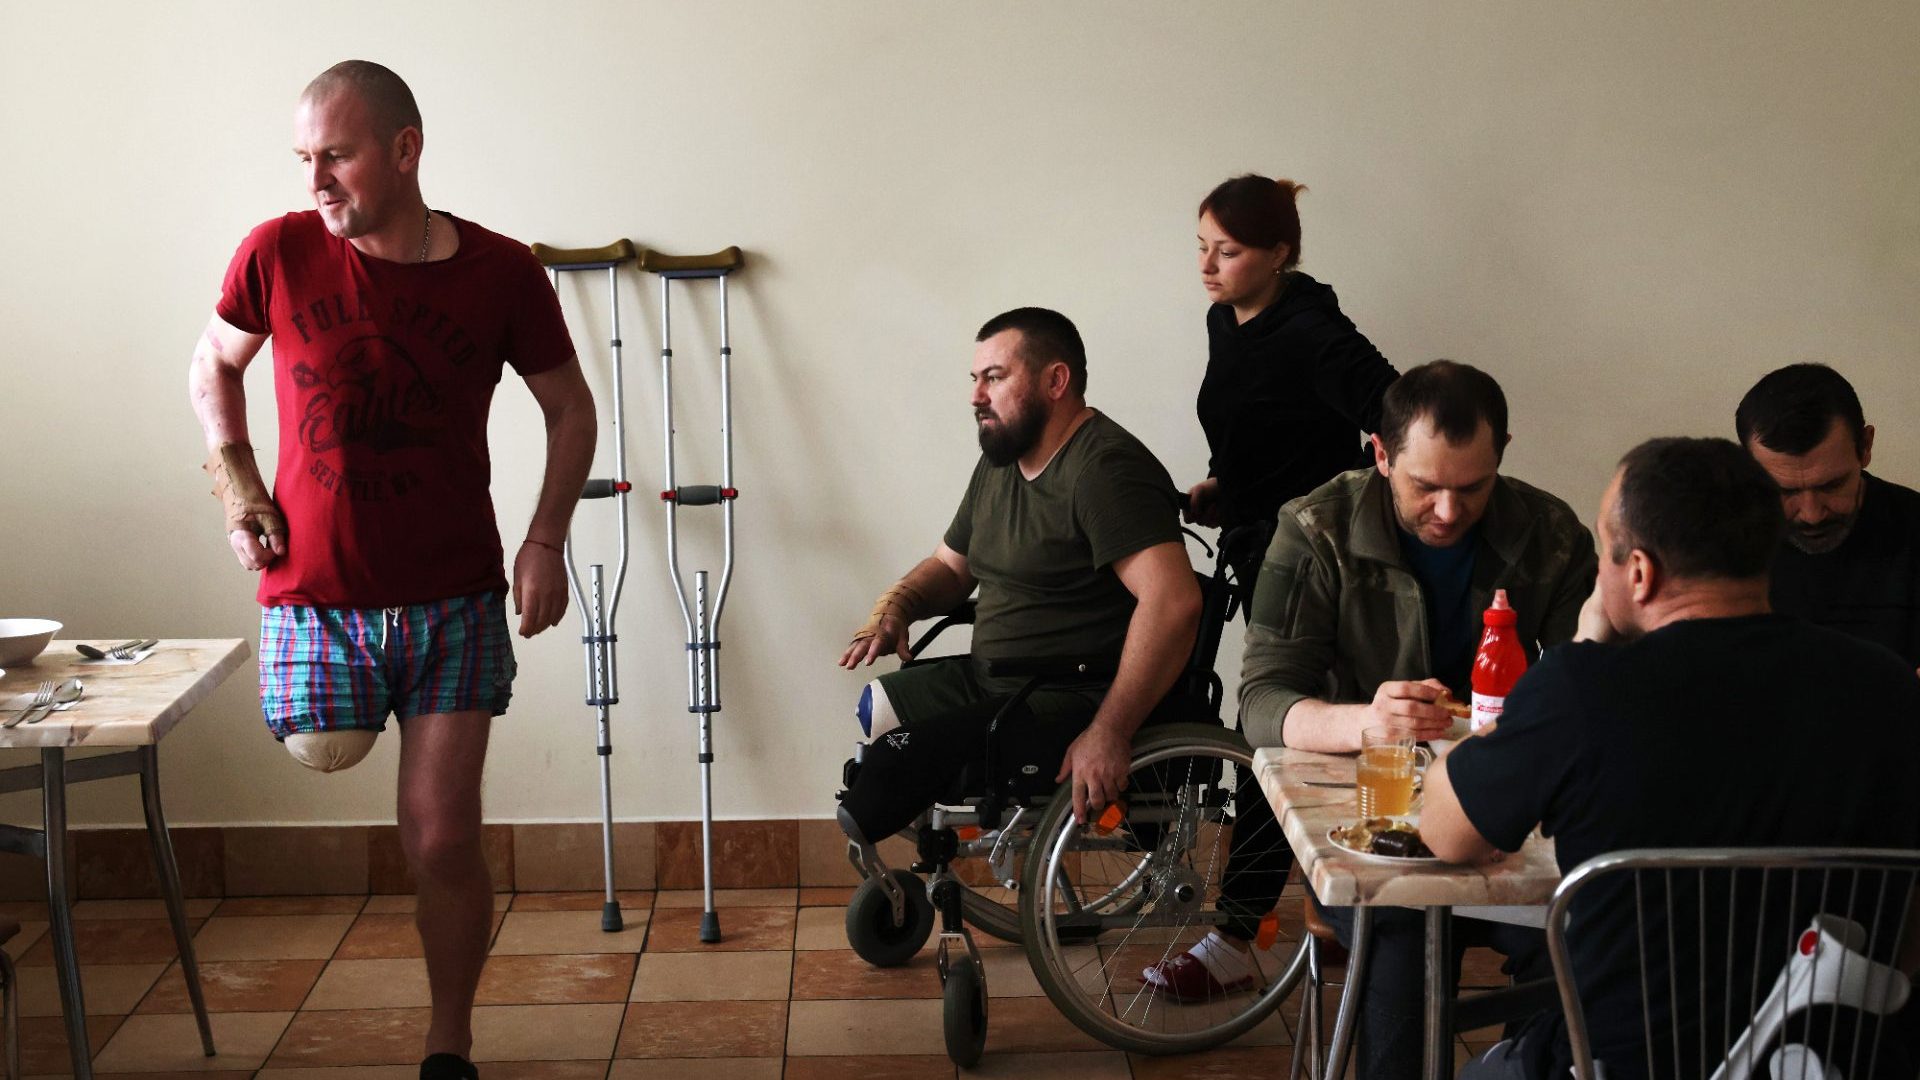 Ukrainian soldiers have lunch at their rehab centre in Lviv. Ivan Nekrasov, centre, lost both legs when his vehicle hit a landmine. Photo: Sean Gallup/AFP/Getty